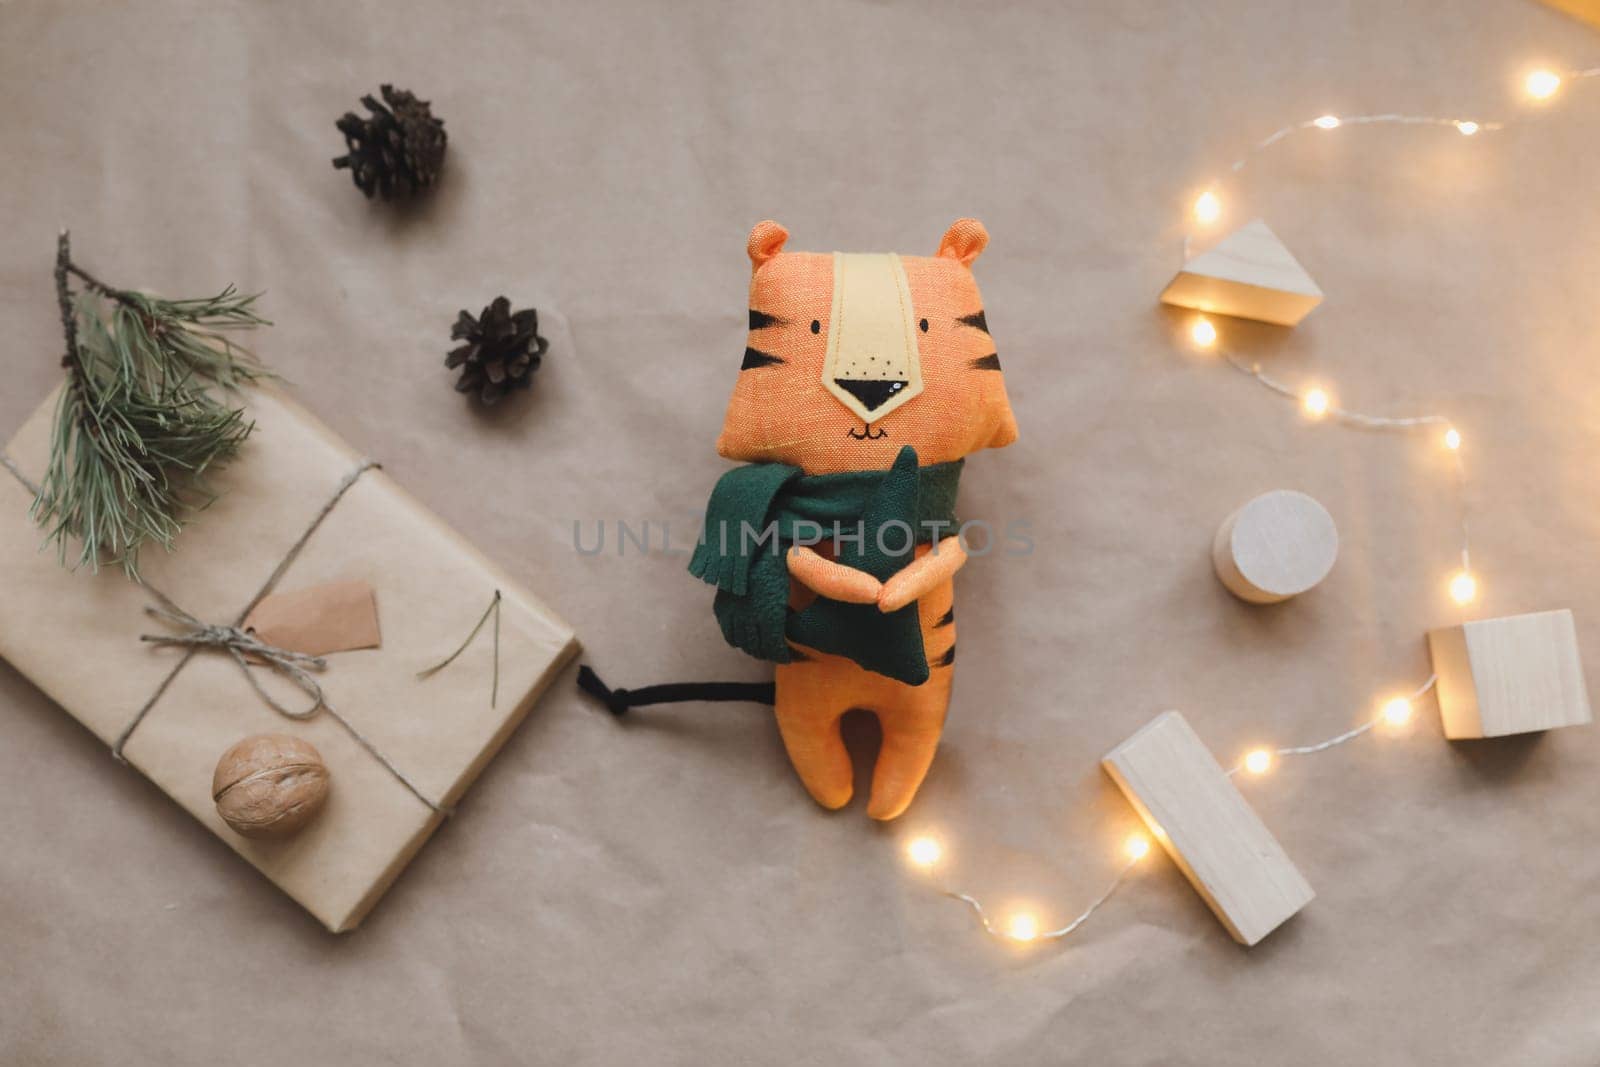 Christmas composition with a tiger toy, symbol of new 2022, a gift, fir tree branches and decorations. Christmas, winter, new year concept. Flat lay, top view by paralisart